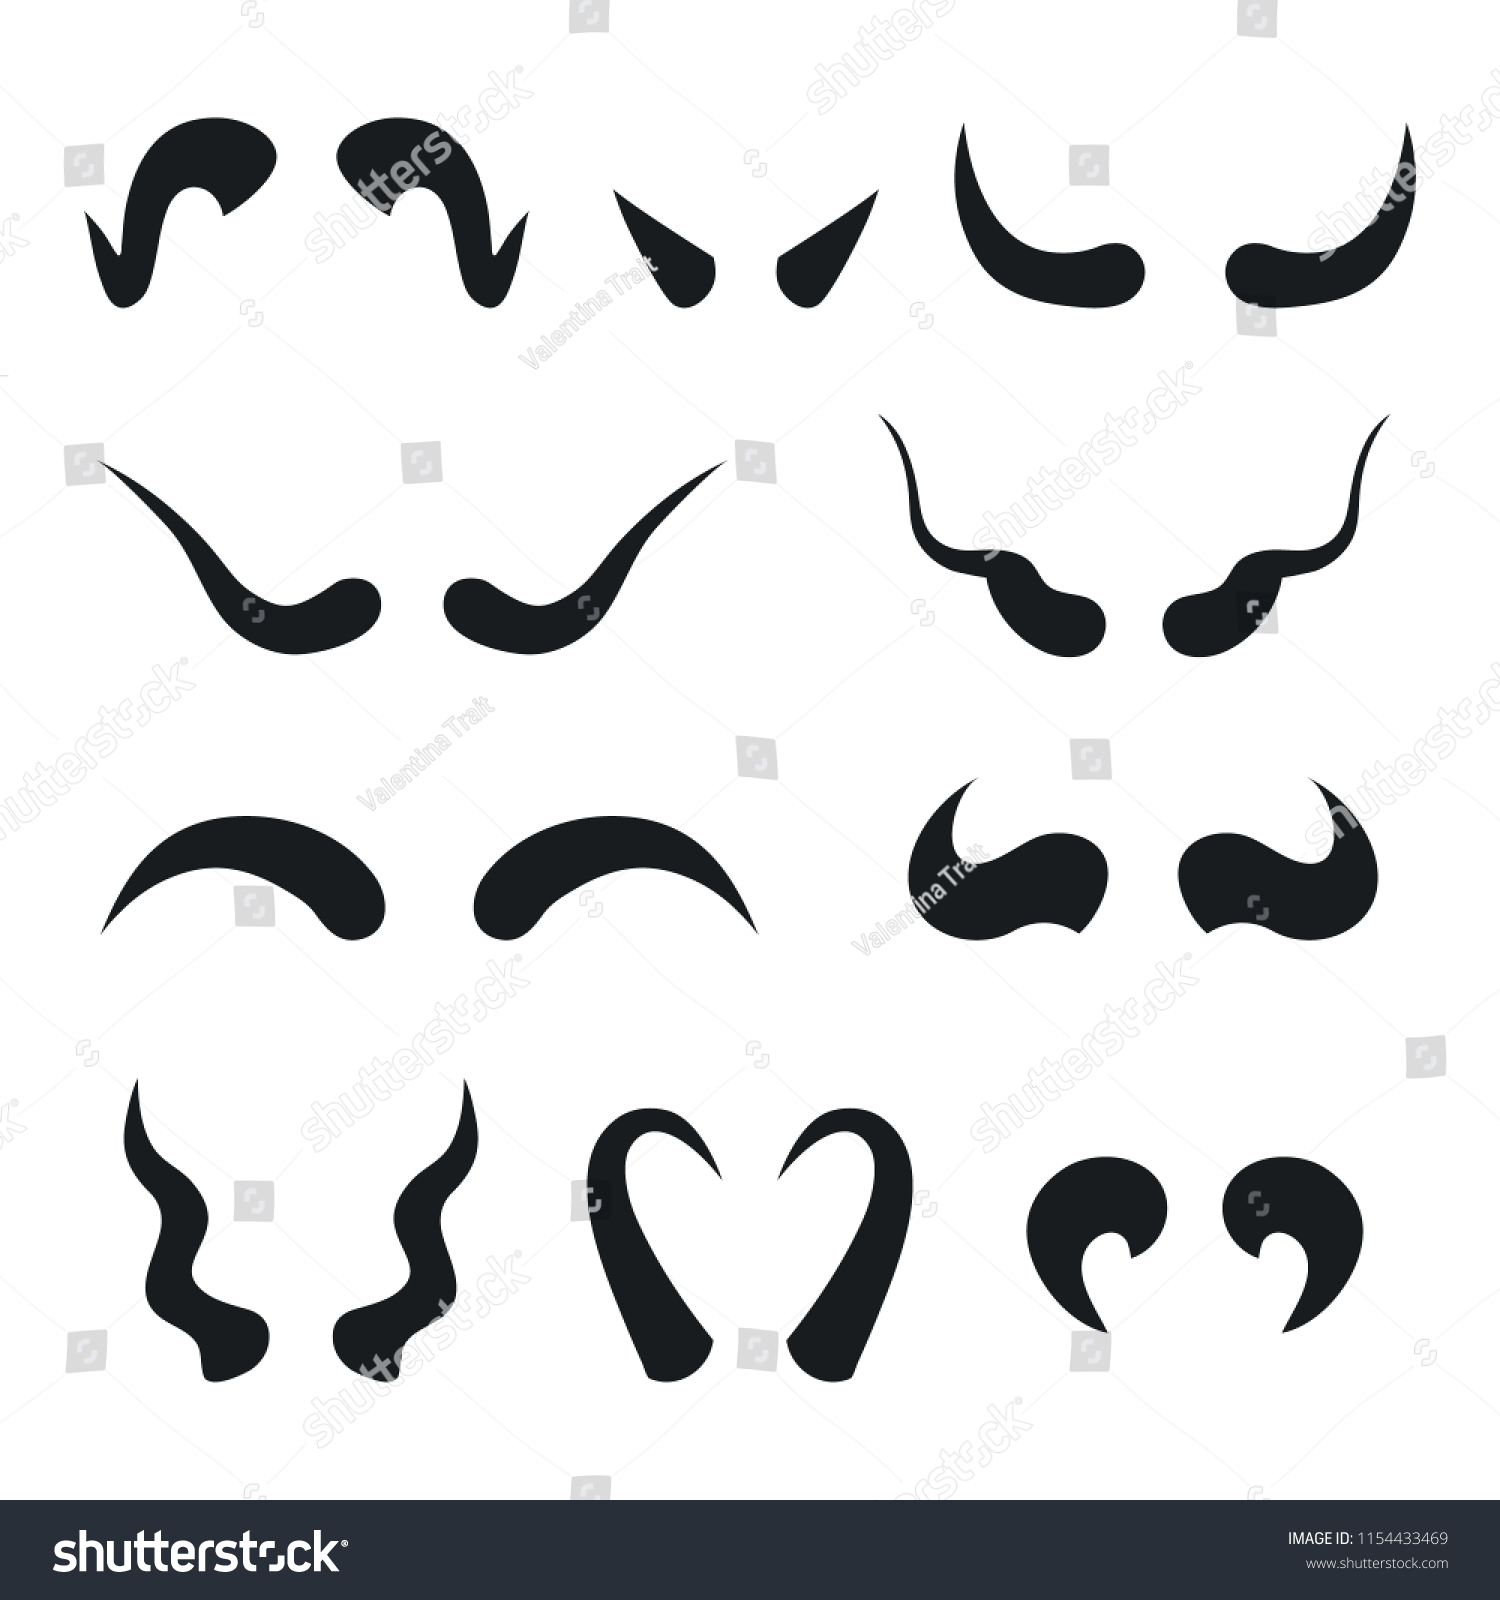 Set Horns Icons Black Silhouettes On Stock Vector (Royalty Free ...